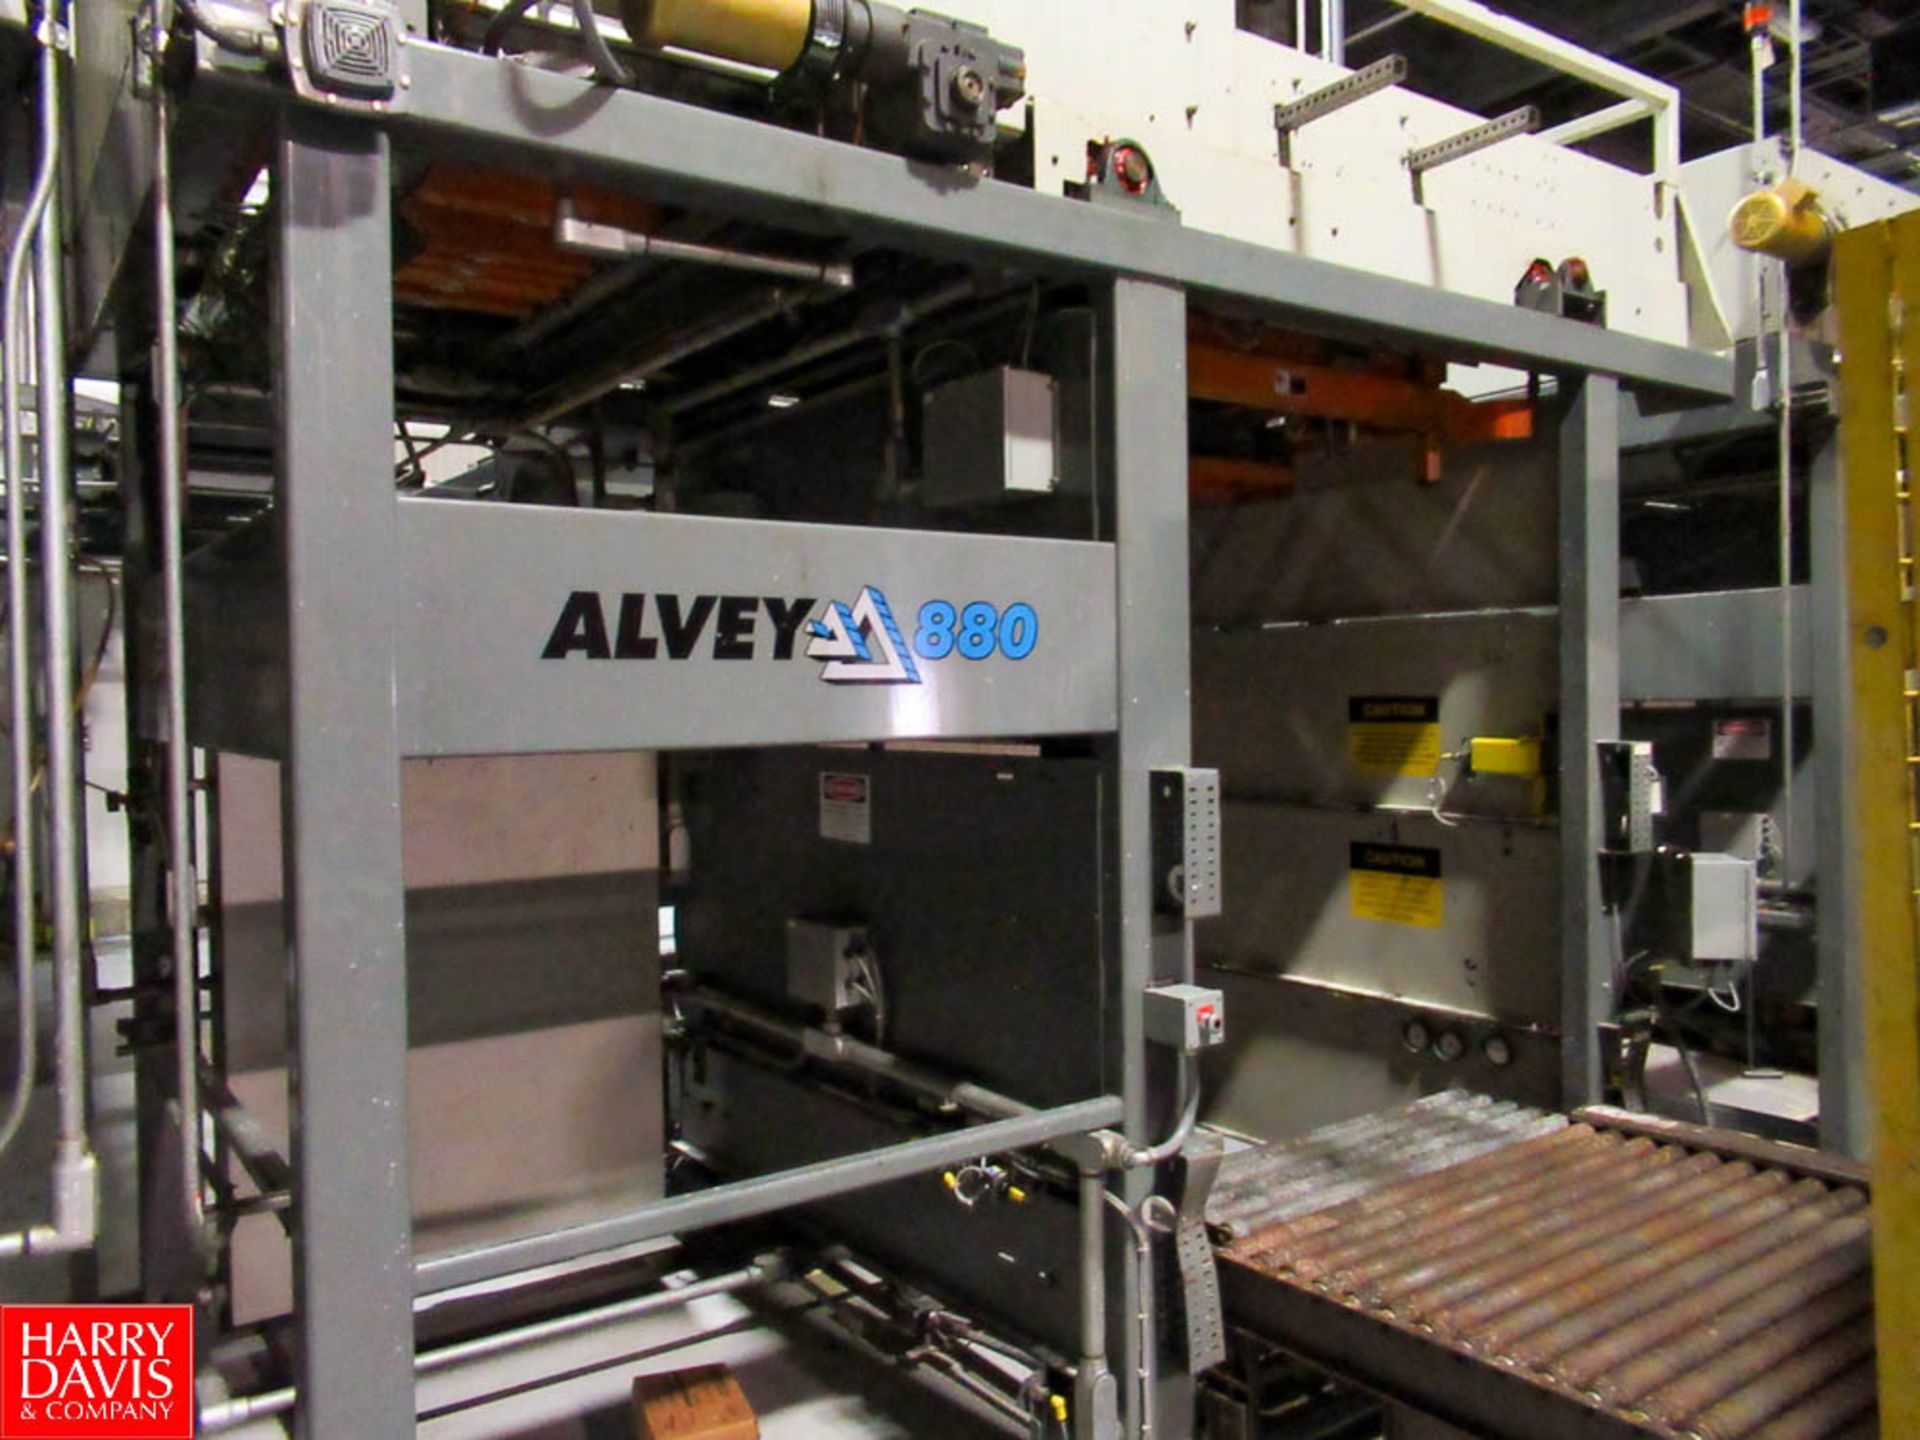 Alvey Full Case High Level Palletizer, Model: Series 880 , with Adjustable Pallet Feed Carriage, - Image 3 of 10